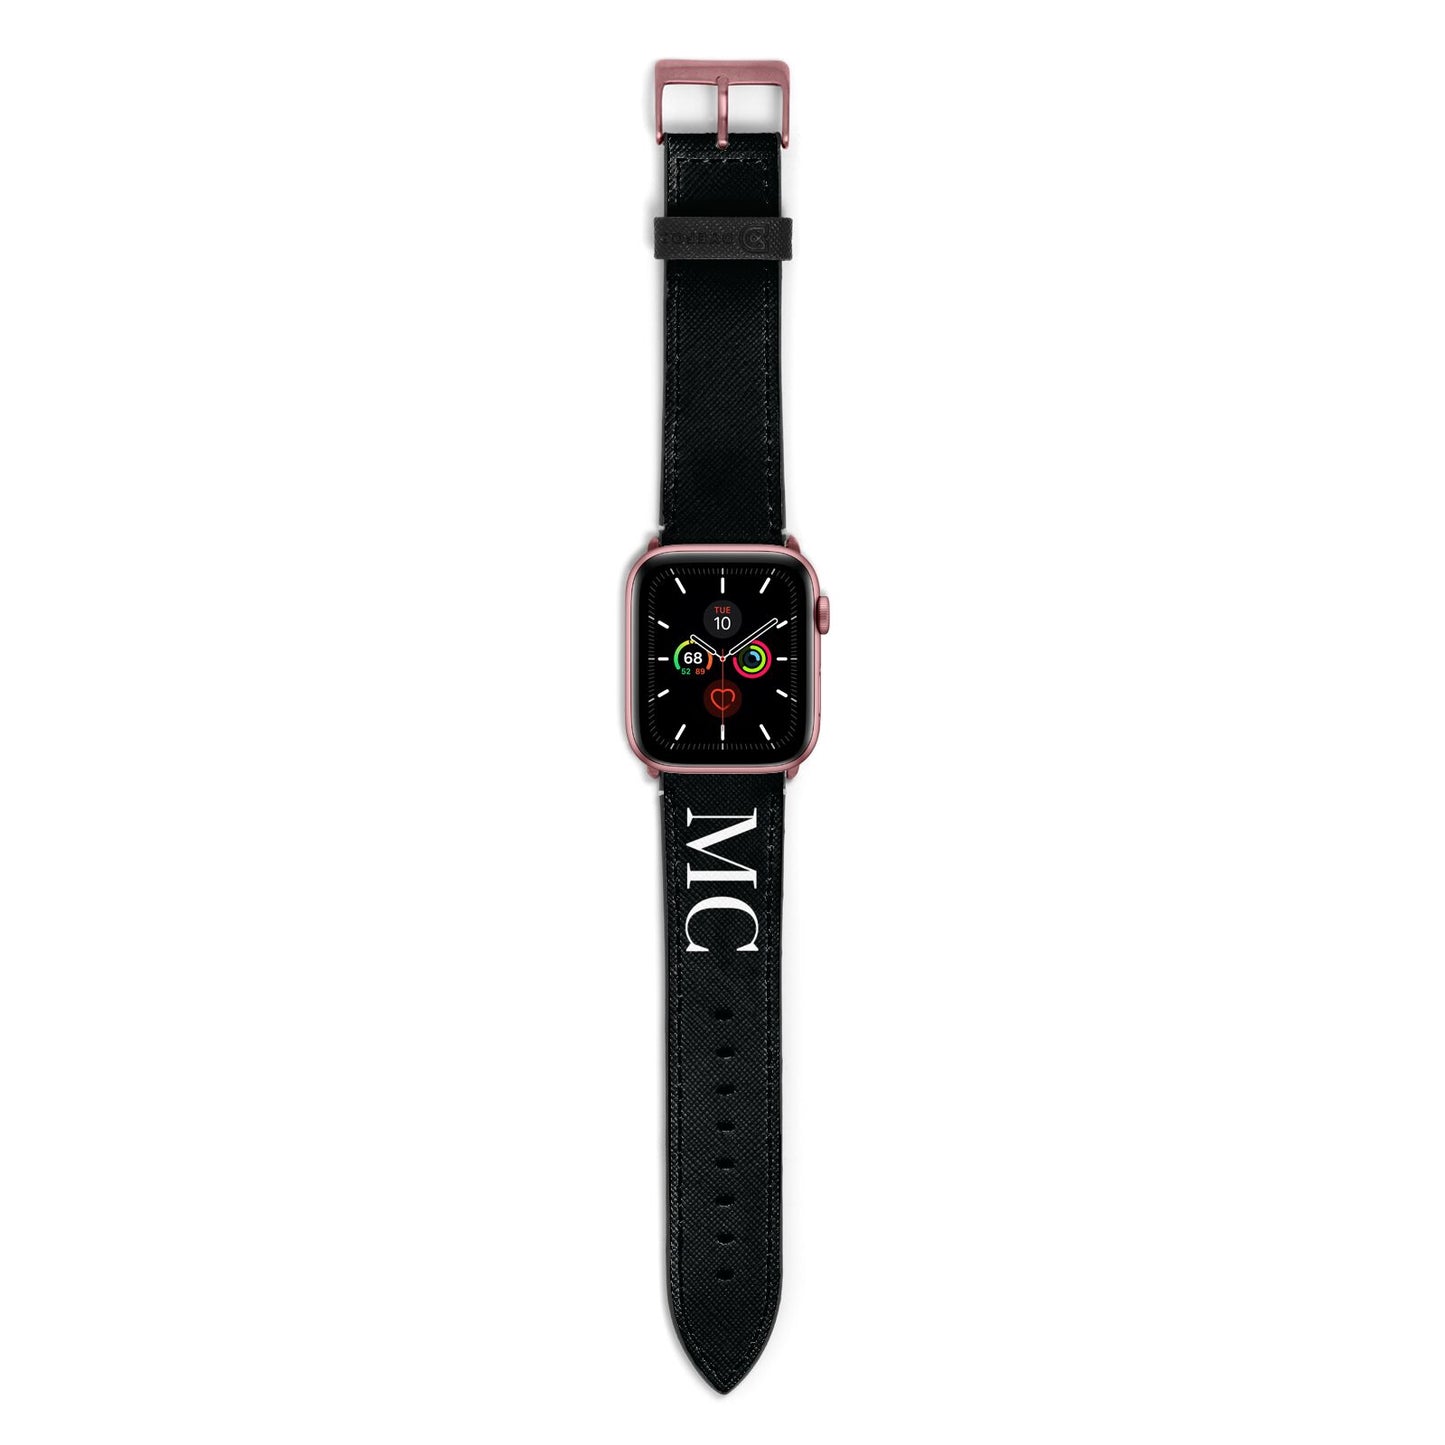 Initials Personalised 1 Apple Watch Strap with Rose Gold Hardware